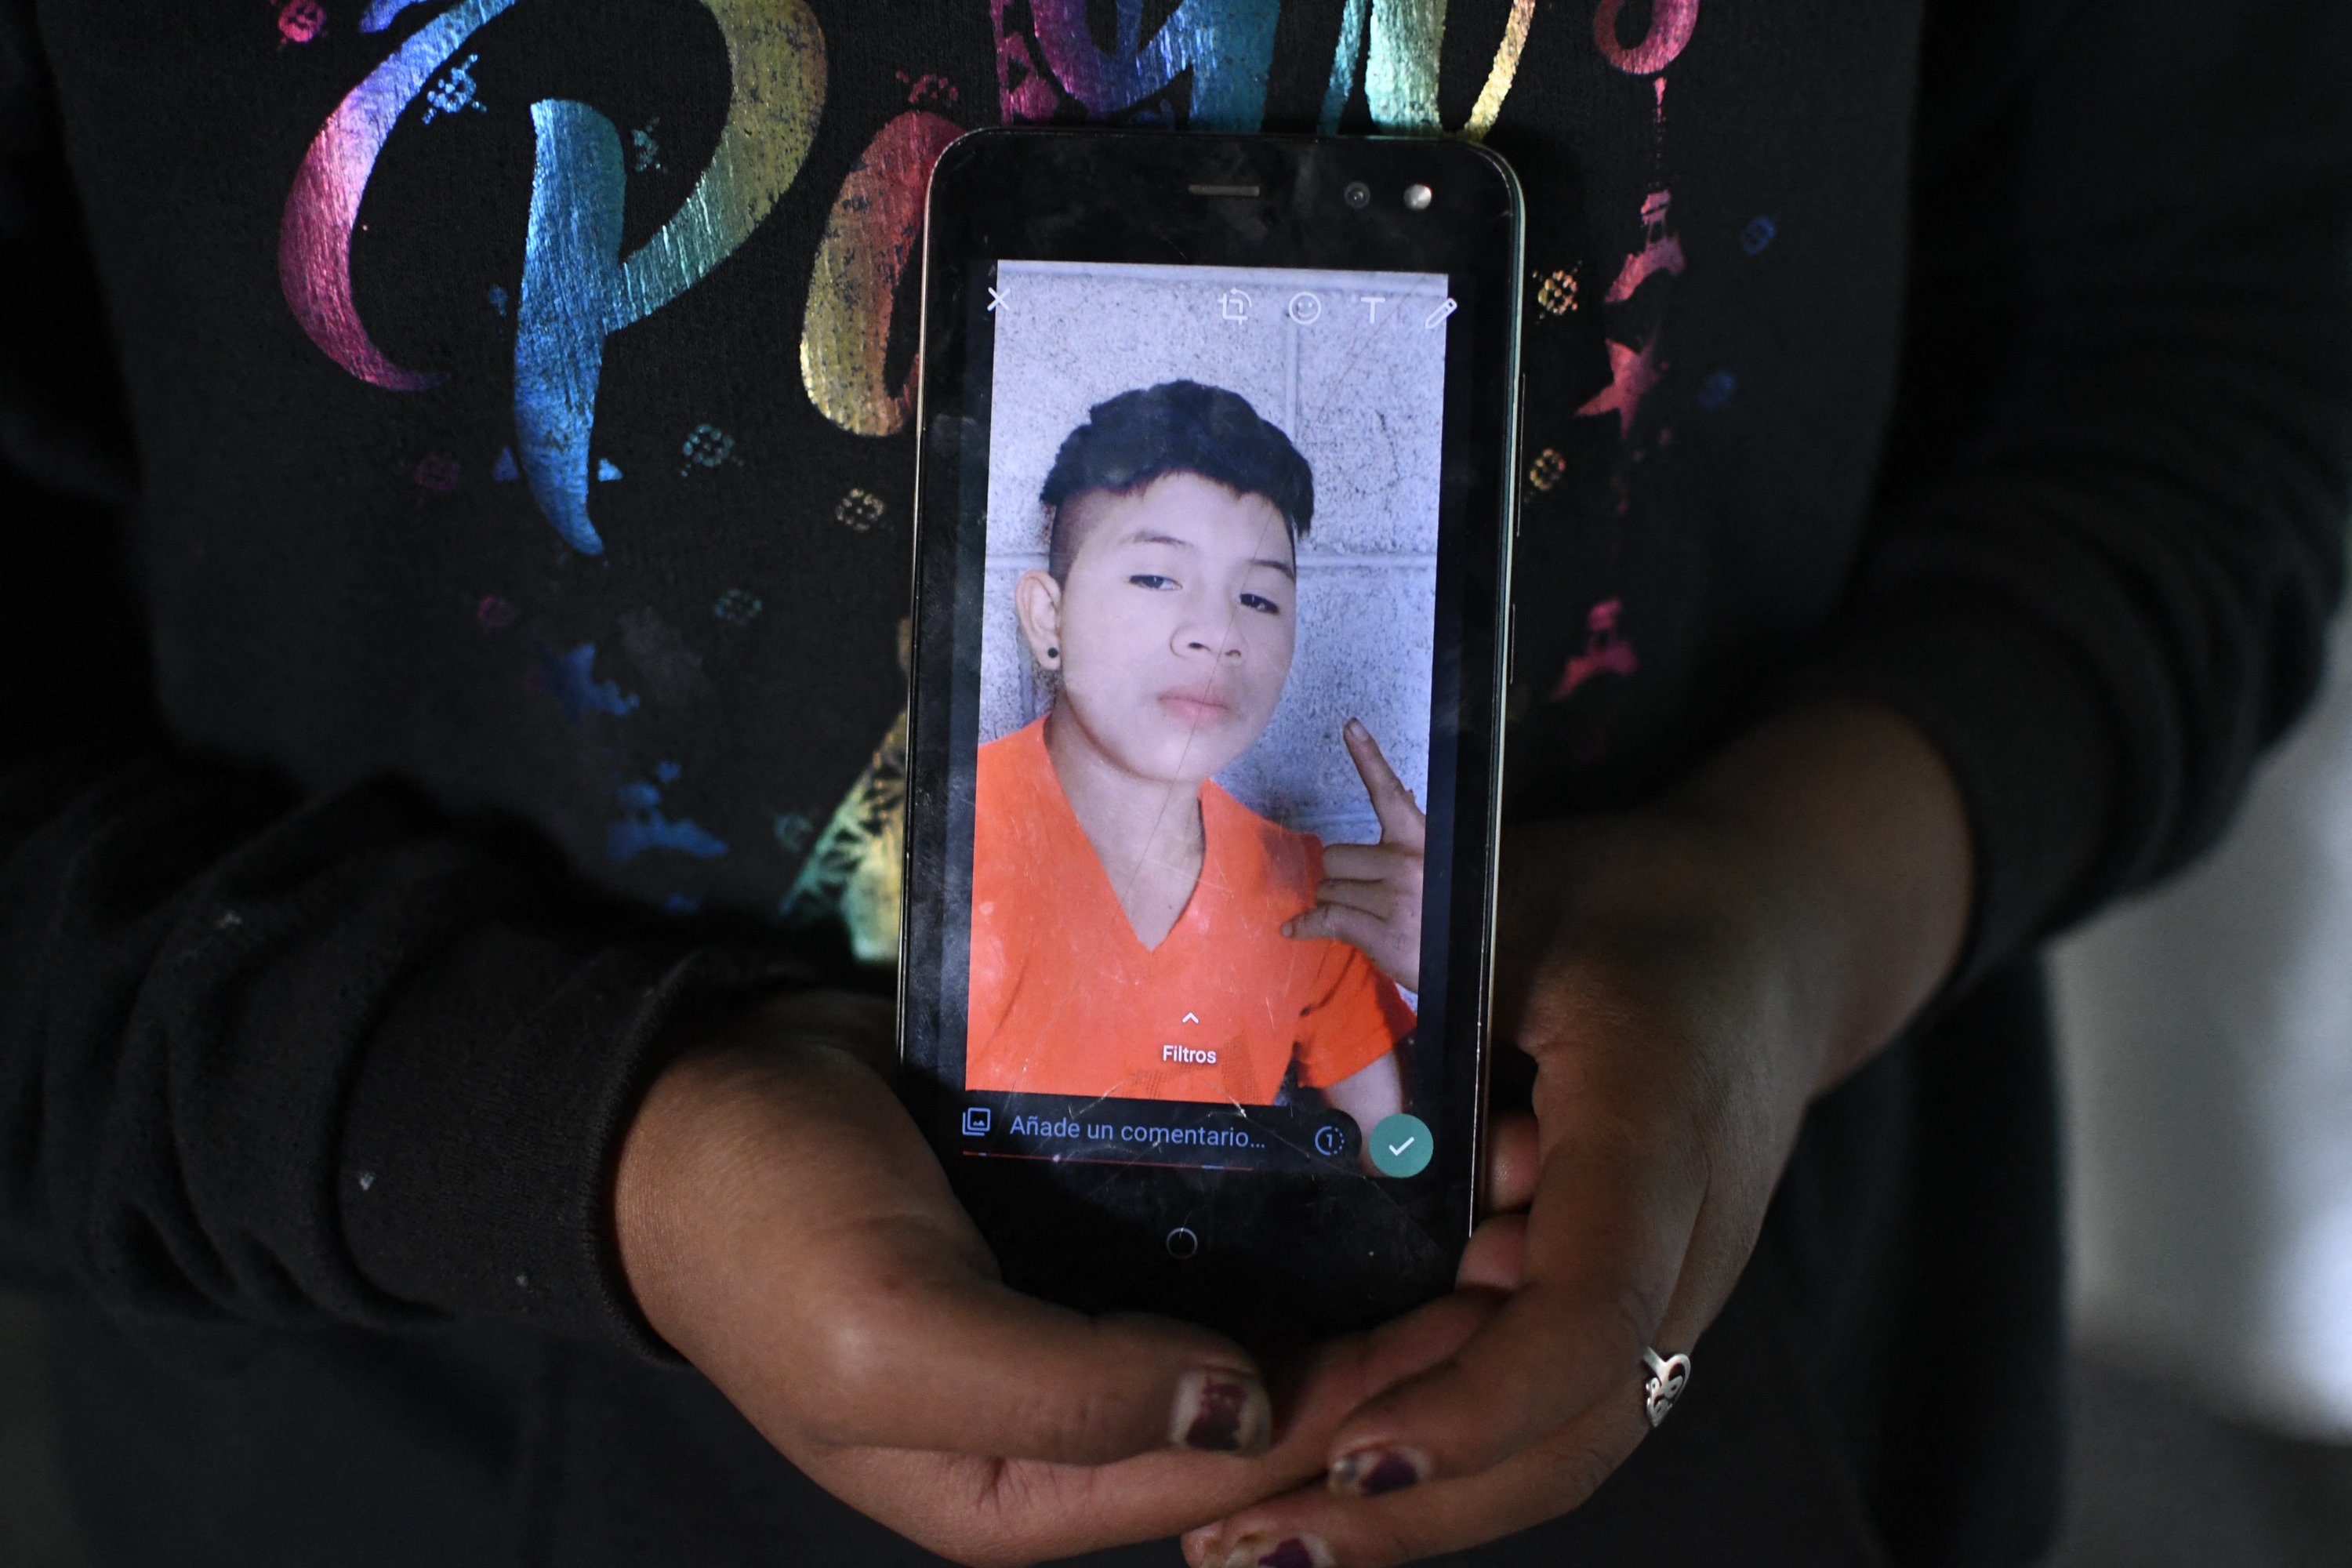 The picture Juan Wilmer sent his mother before boarding the truck. | Source: Getty Images